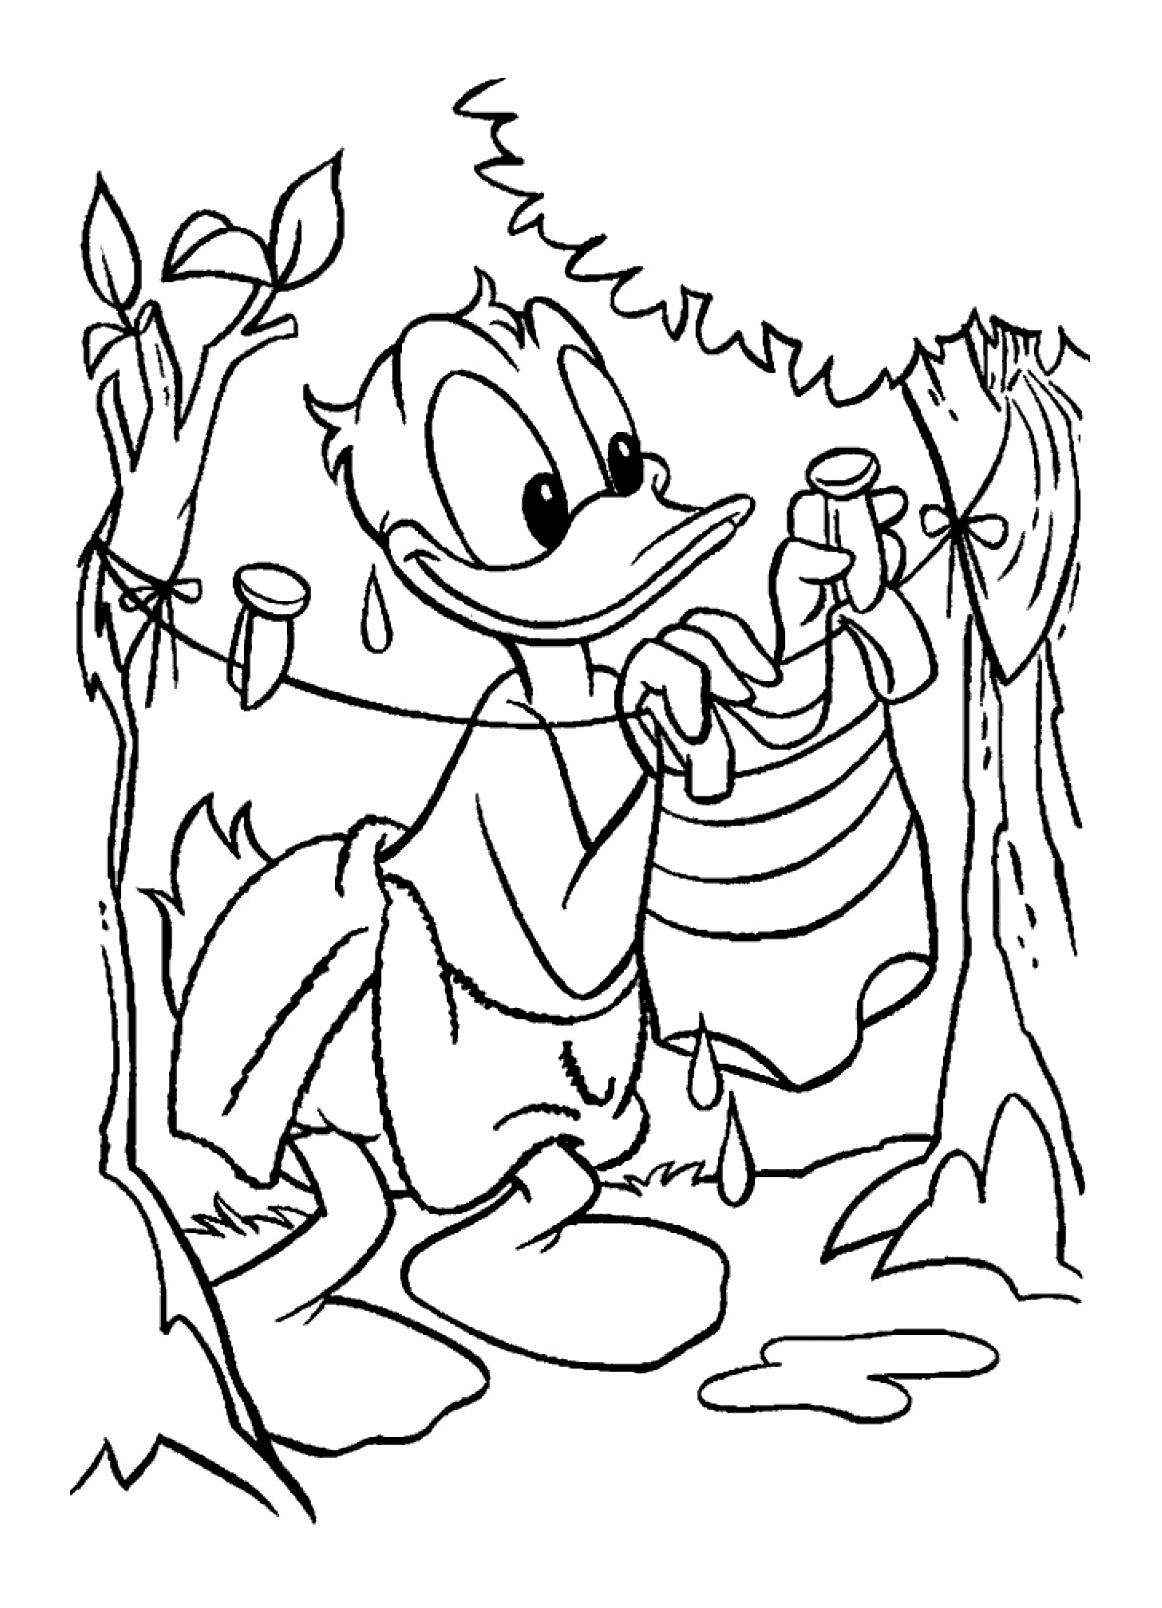 Funny Donald coloring page for children